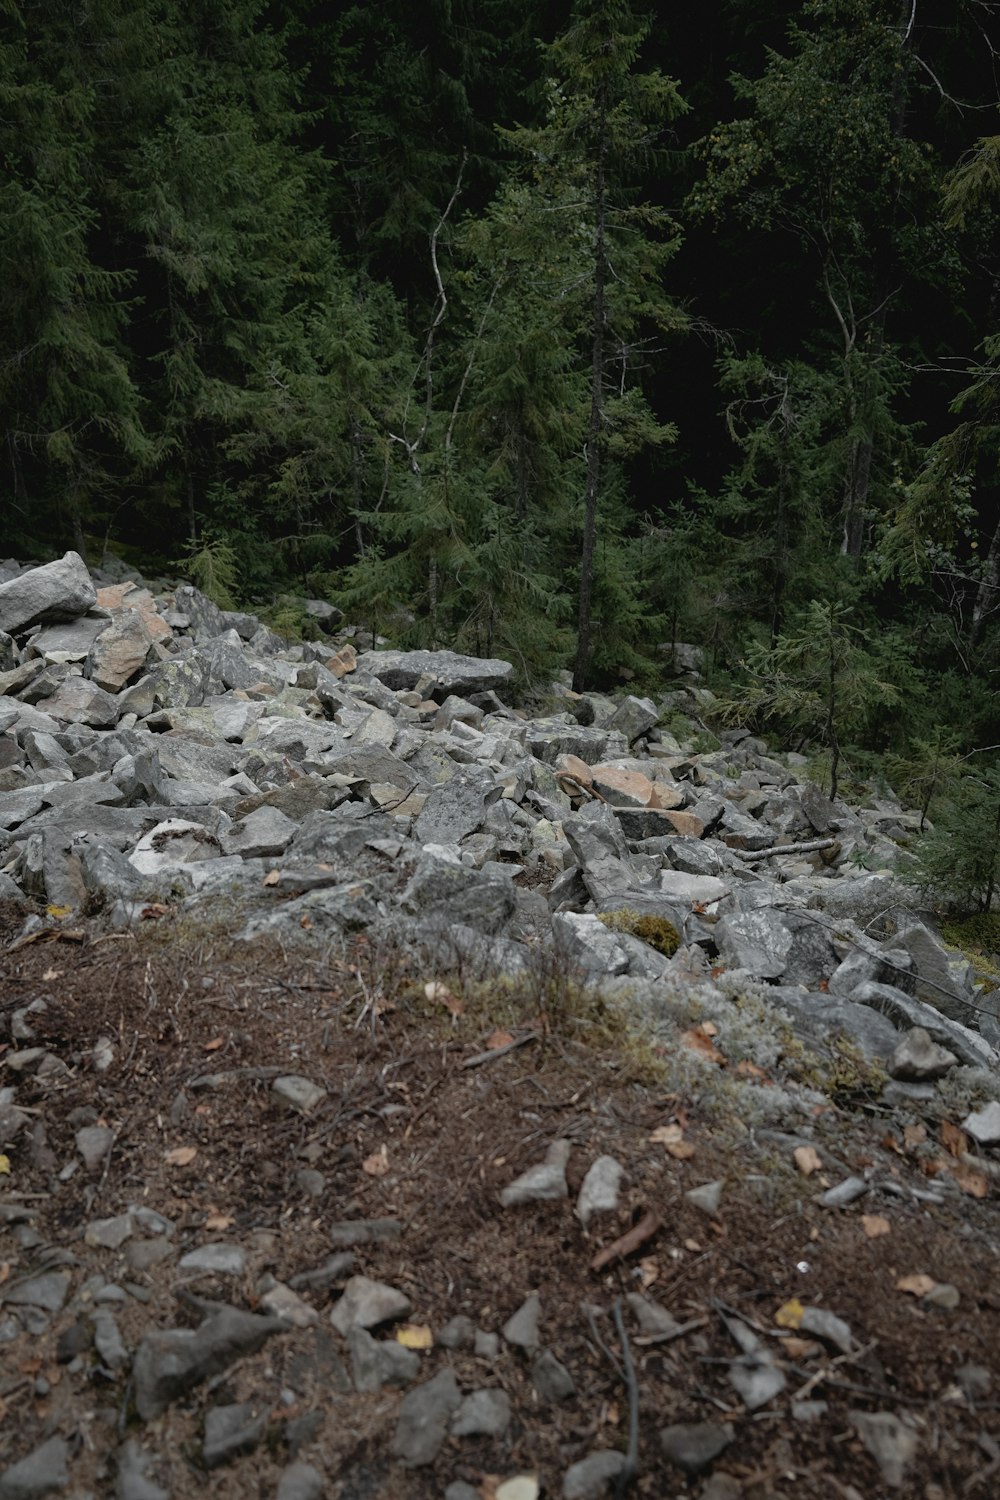 a large pile of rocks sitting next to a forest